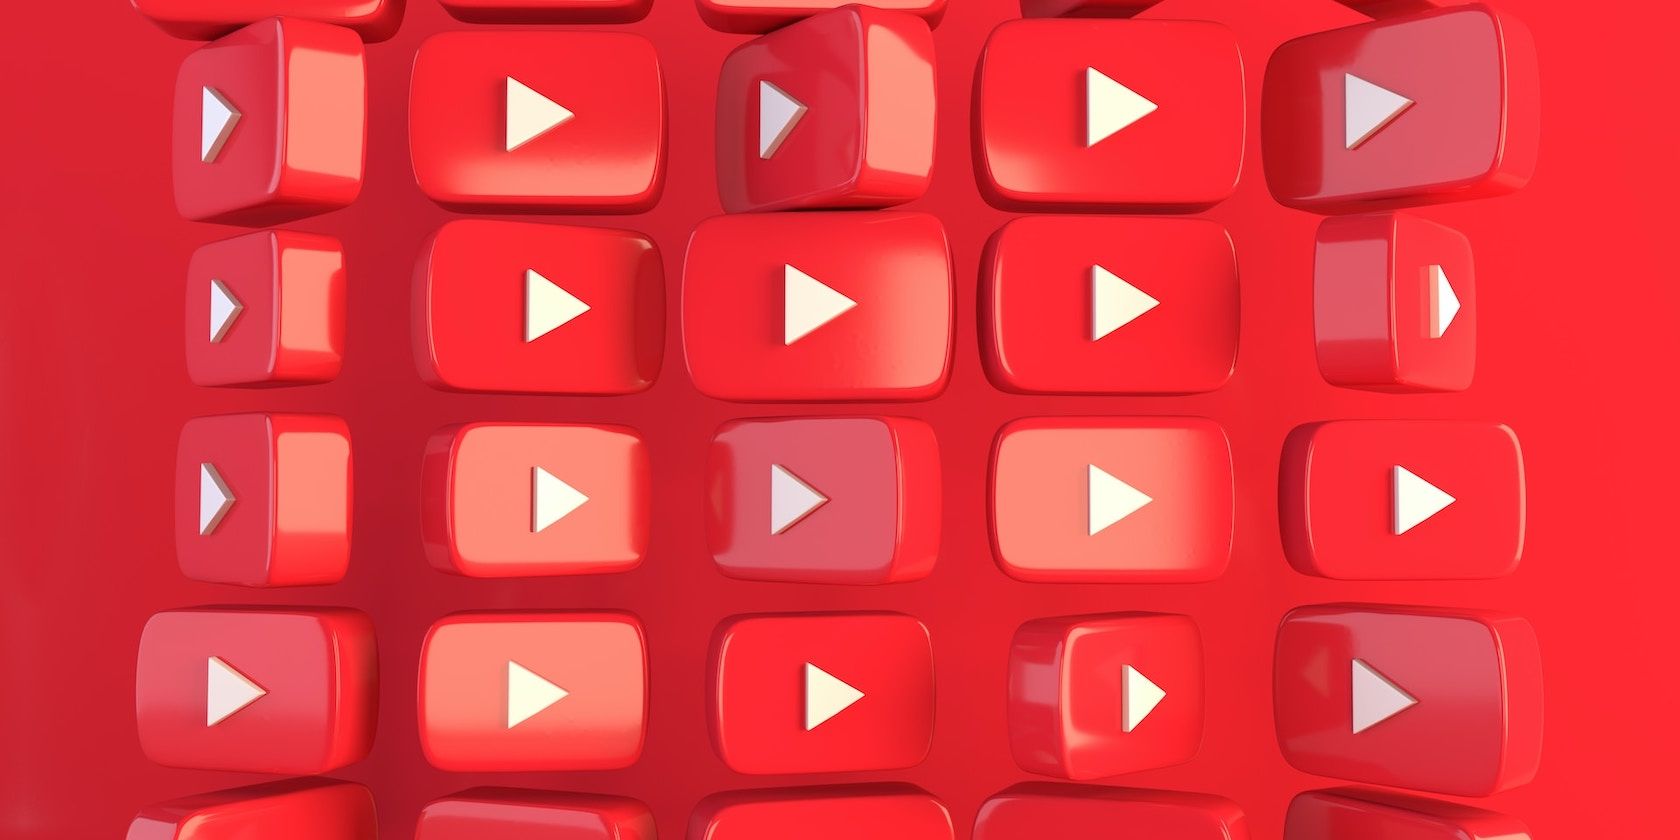 Multiple YouTube Logos Stacked Together